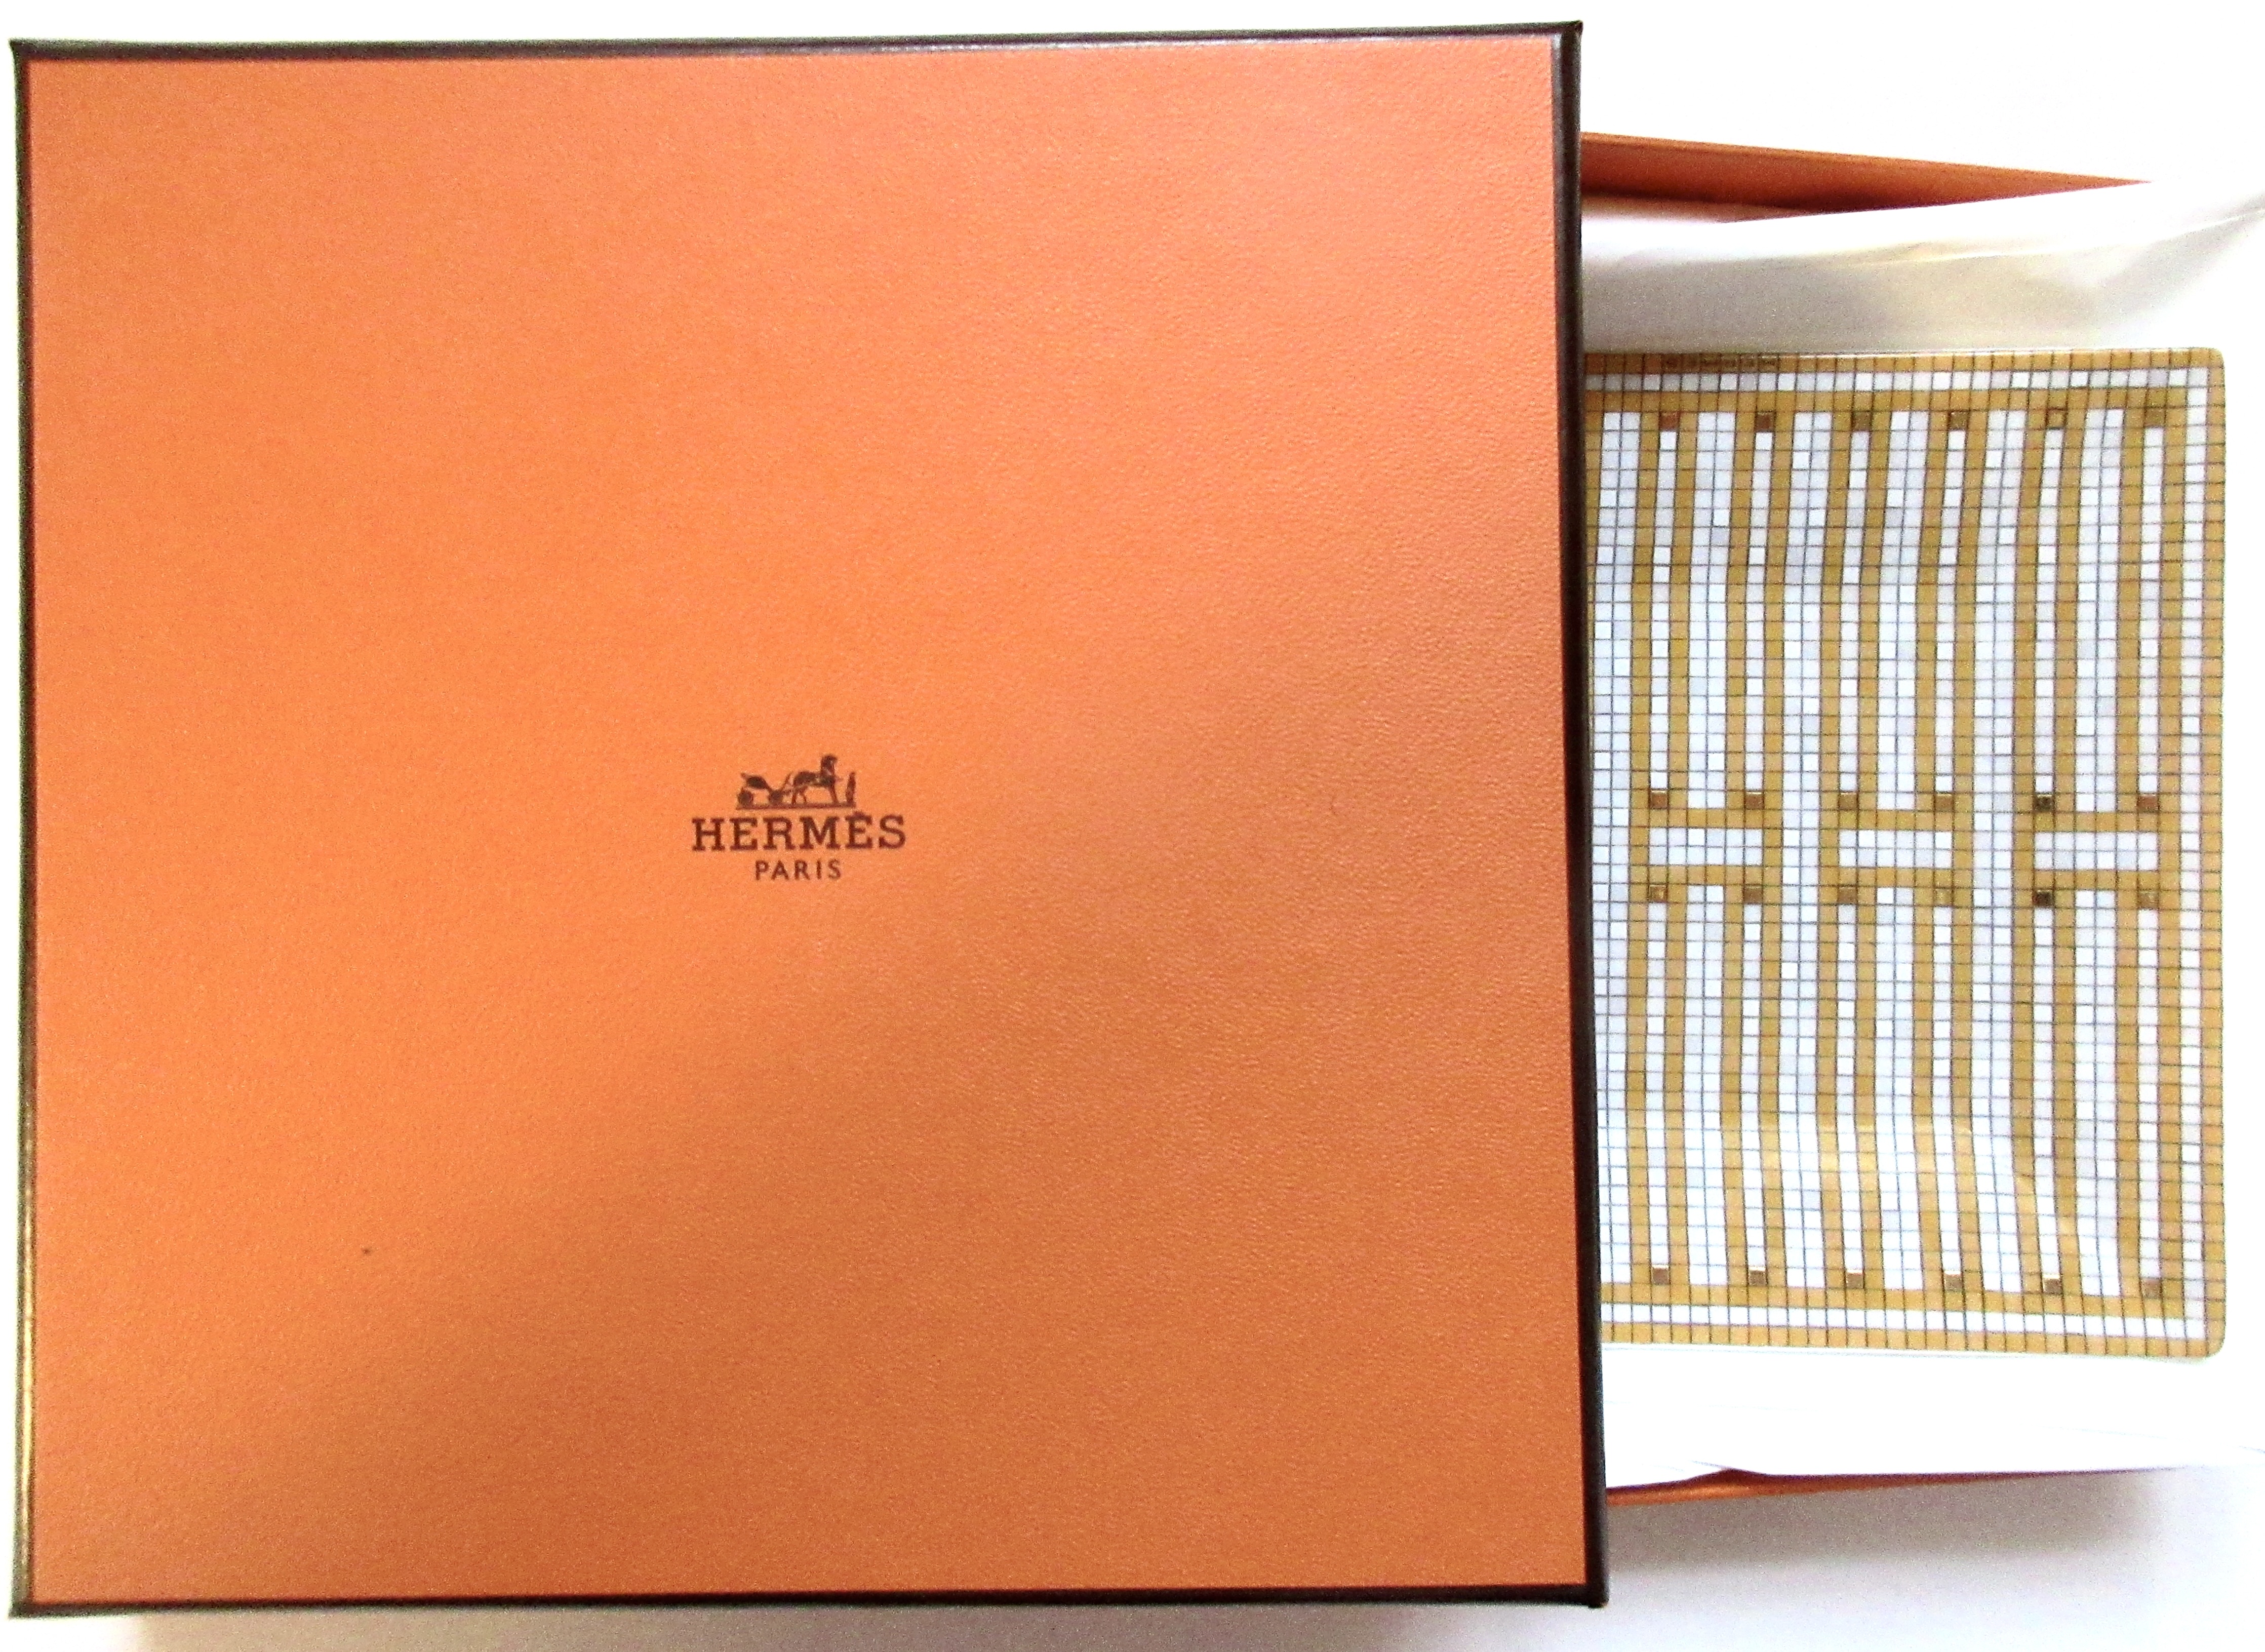 Hermes French Porcelain Mosaique Tray~P77693217